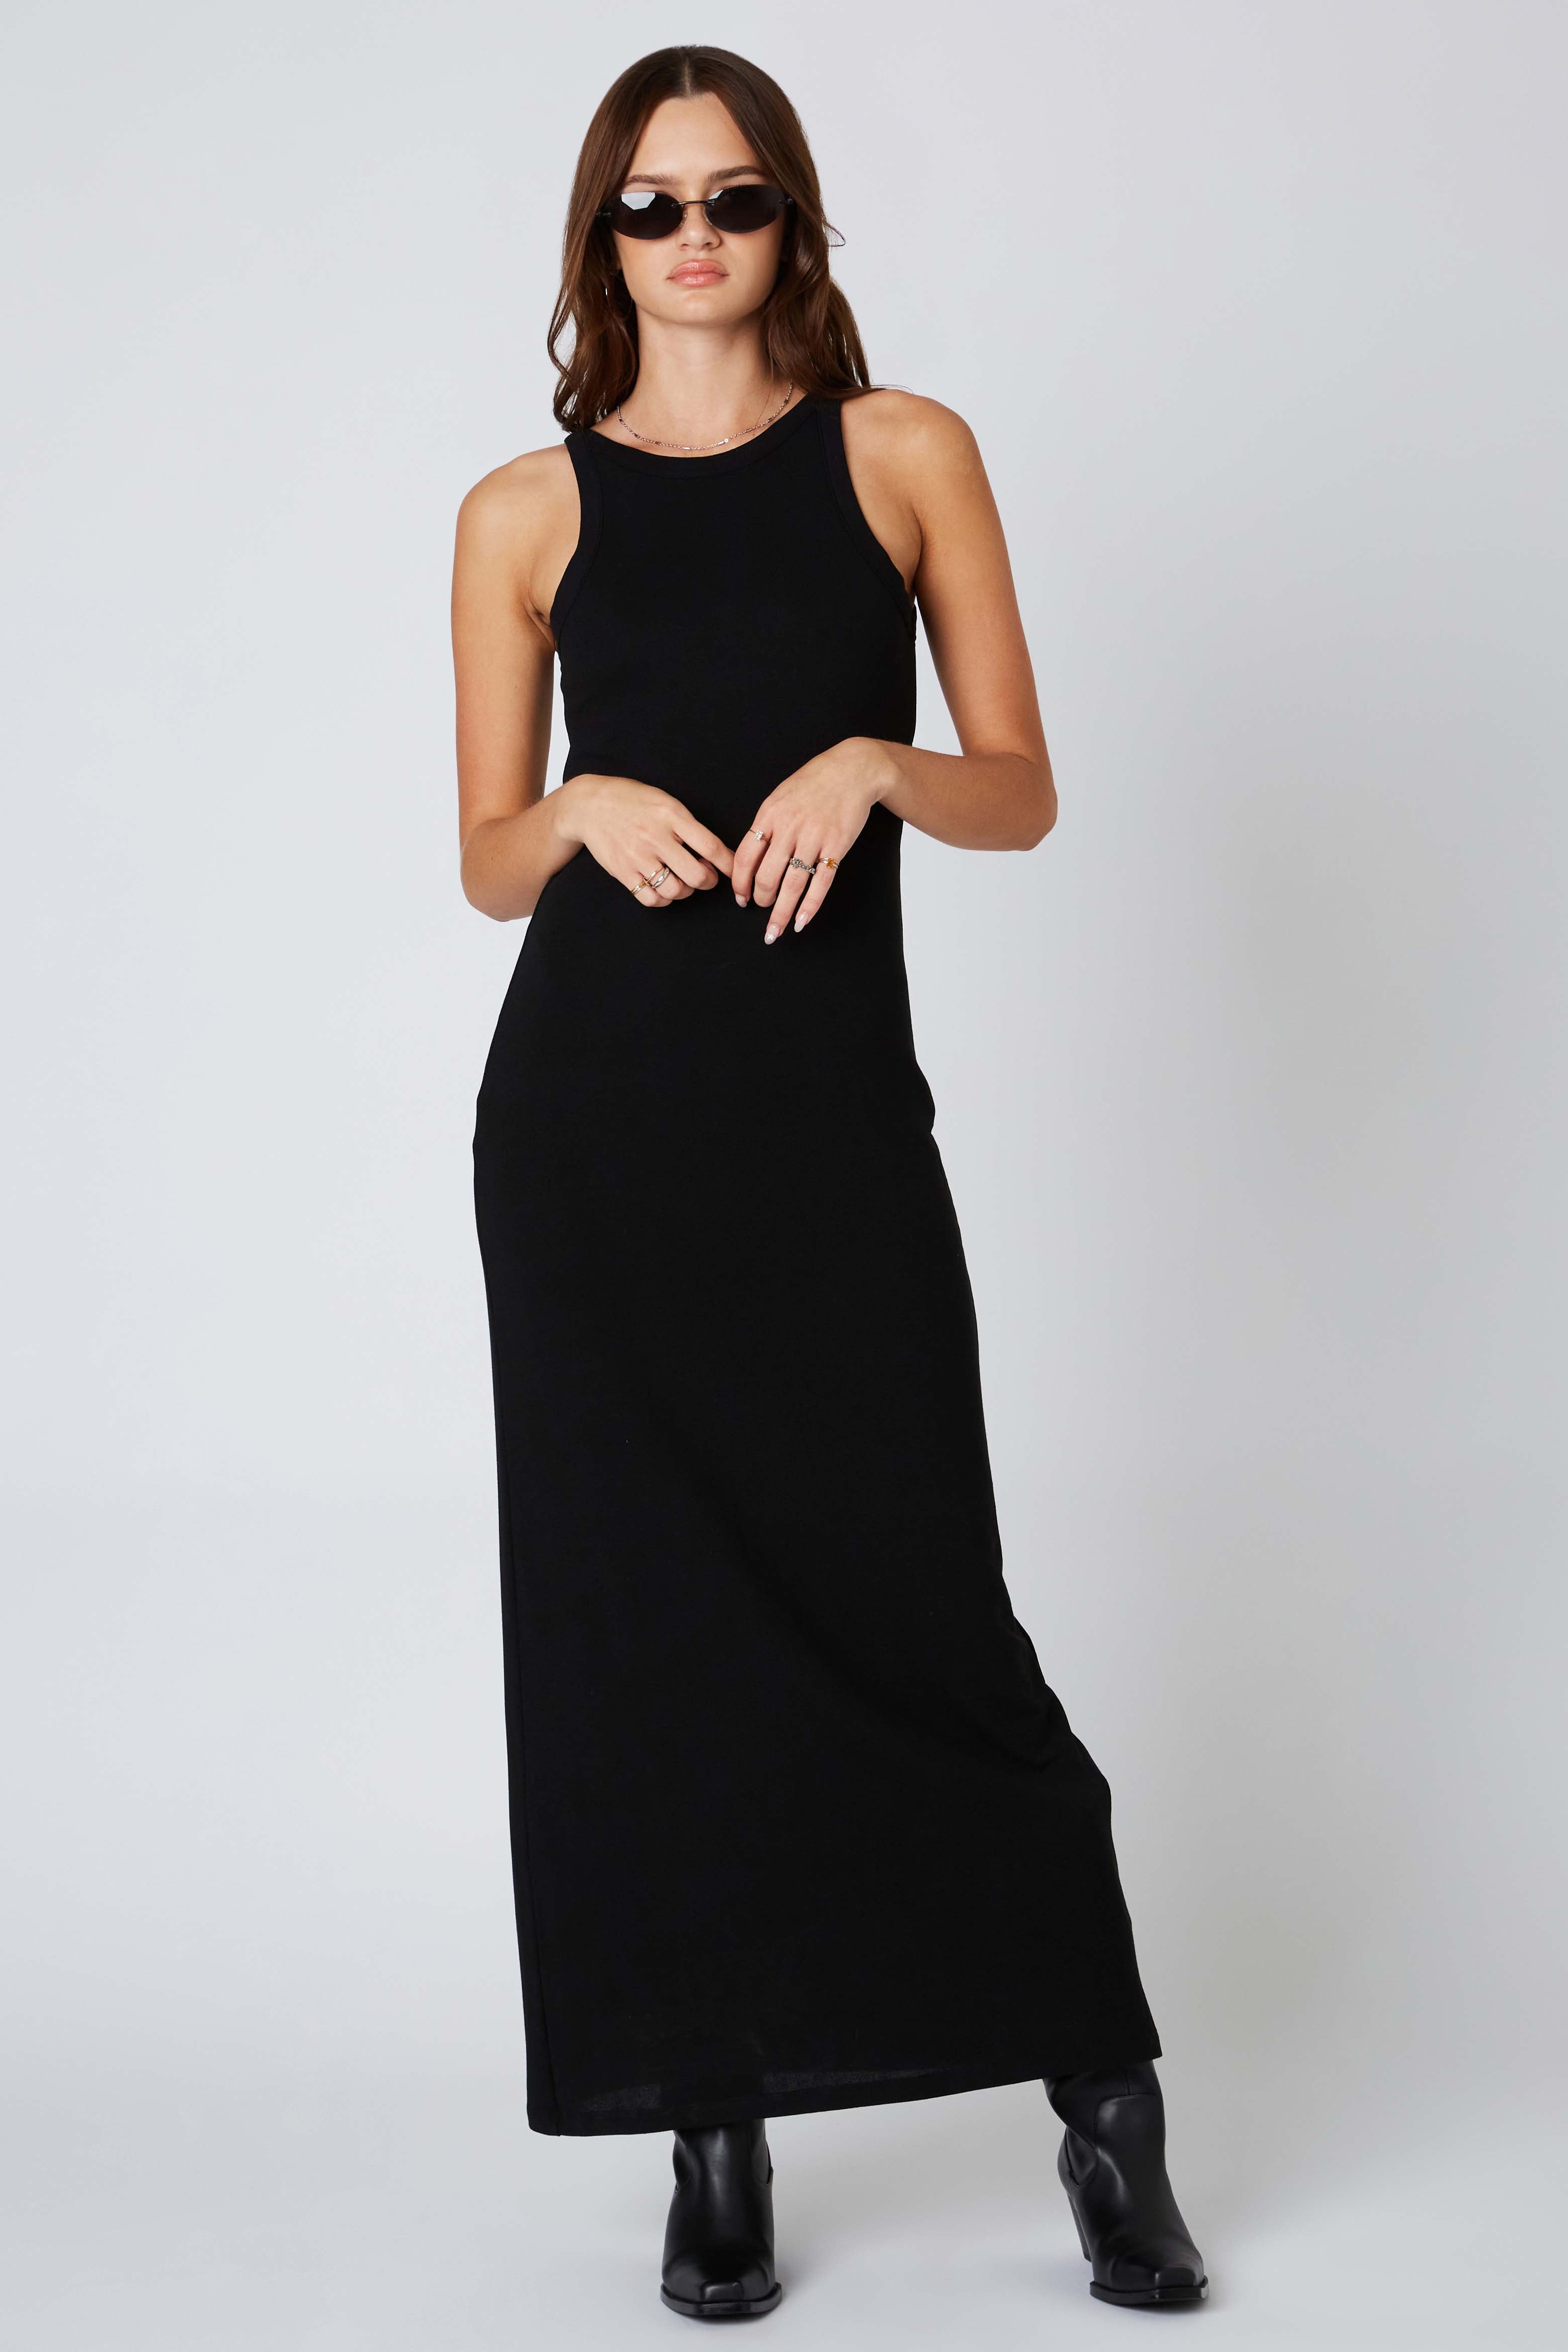 Bodycon Maxi Dress in Black Front View